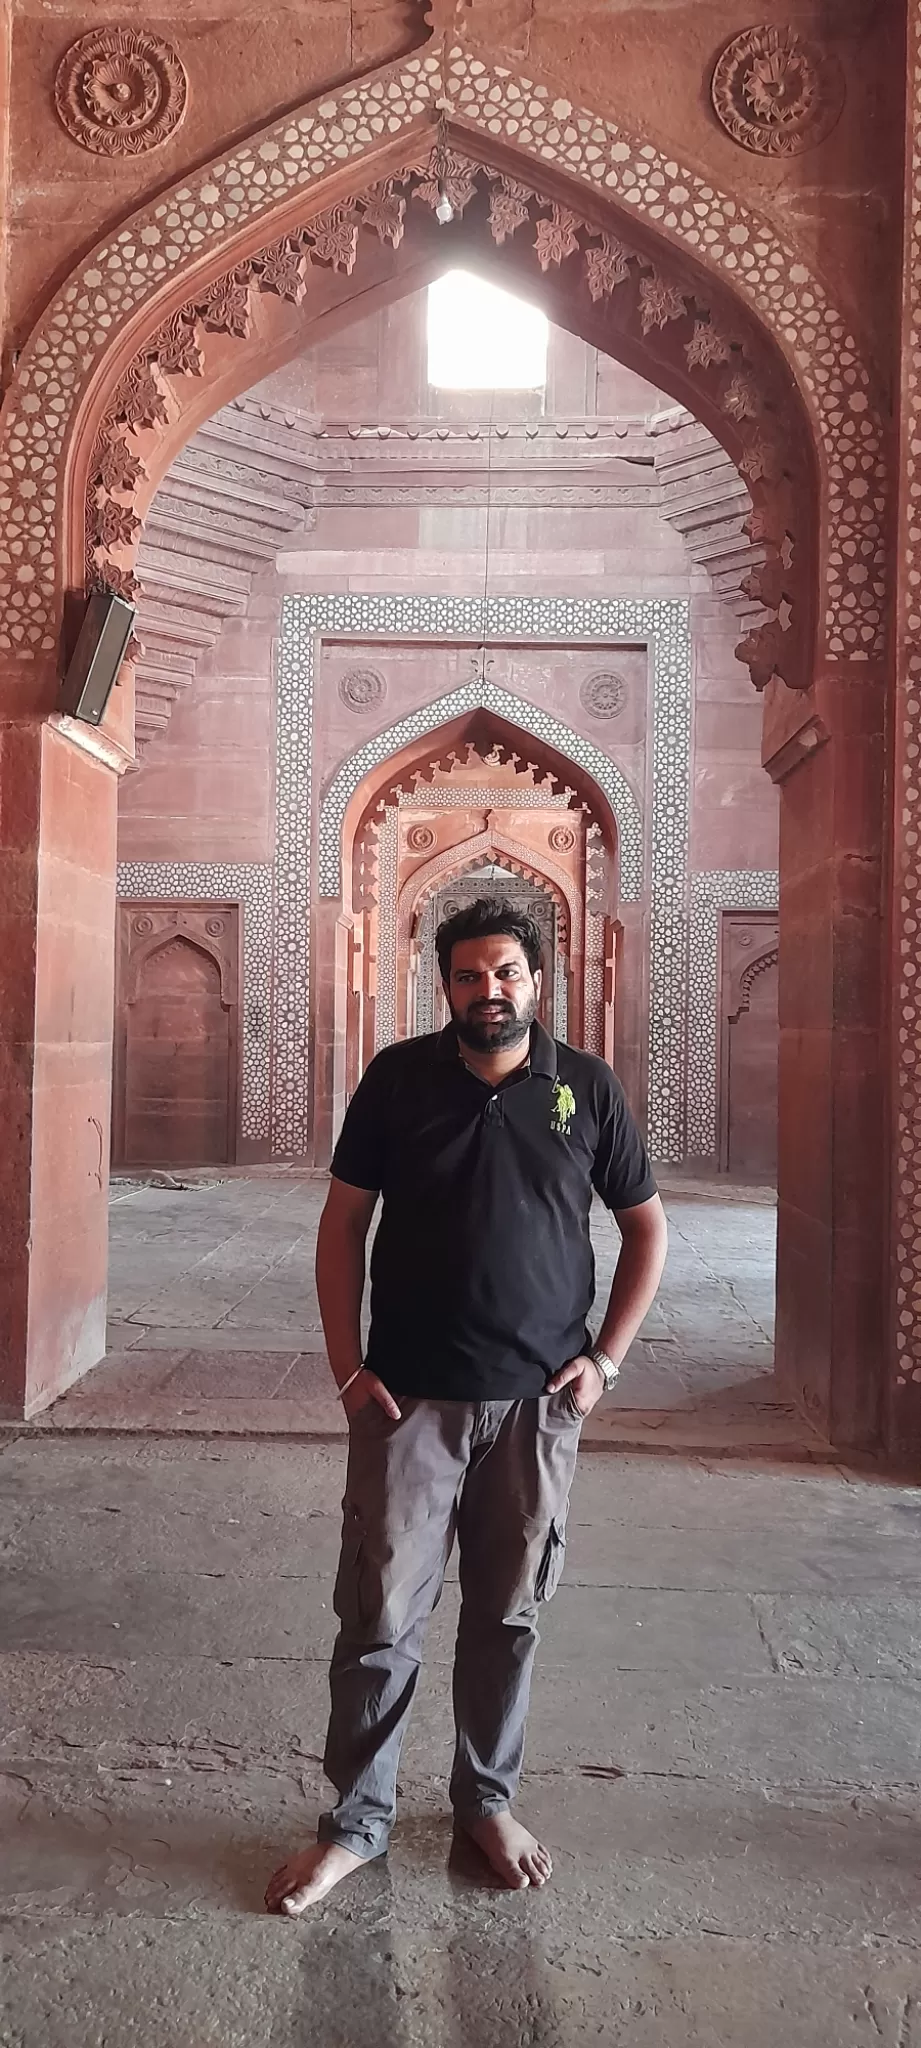 Photo of Fatehpur Sikri Fort By Dr. Yadwinder Singh 